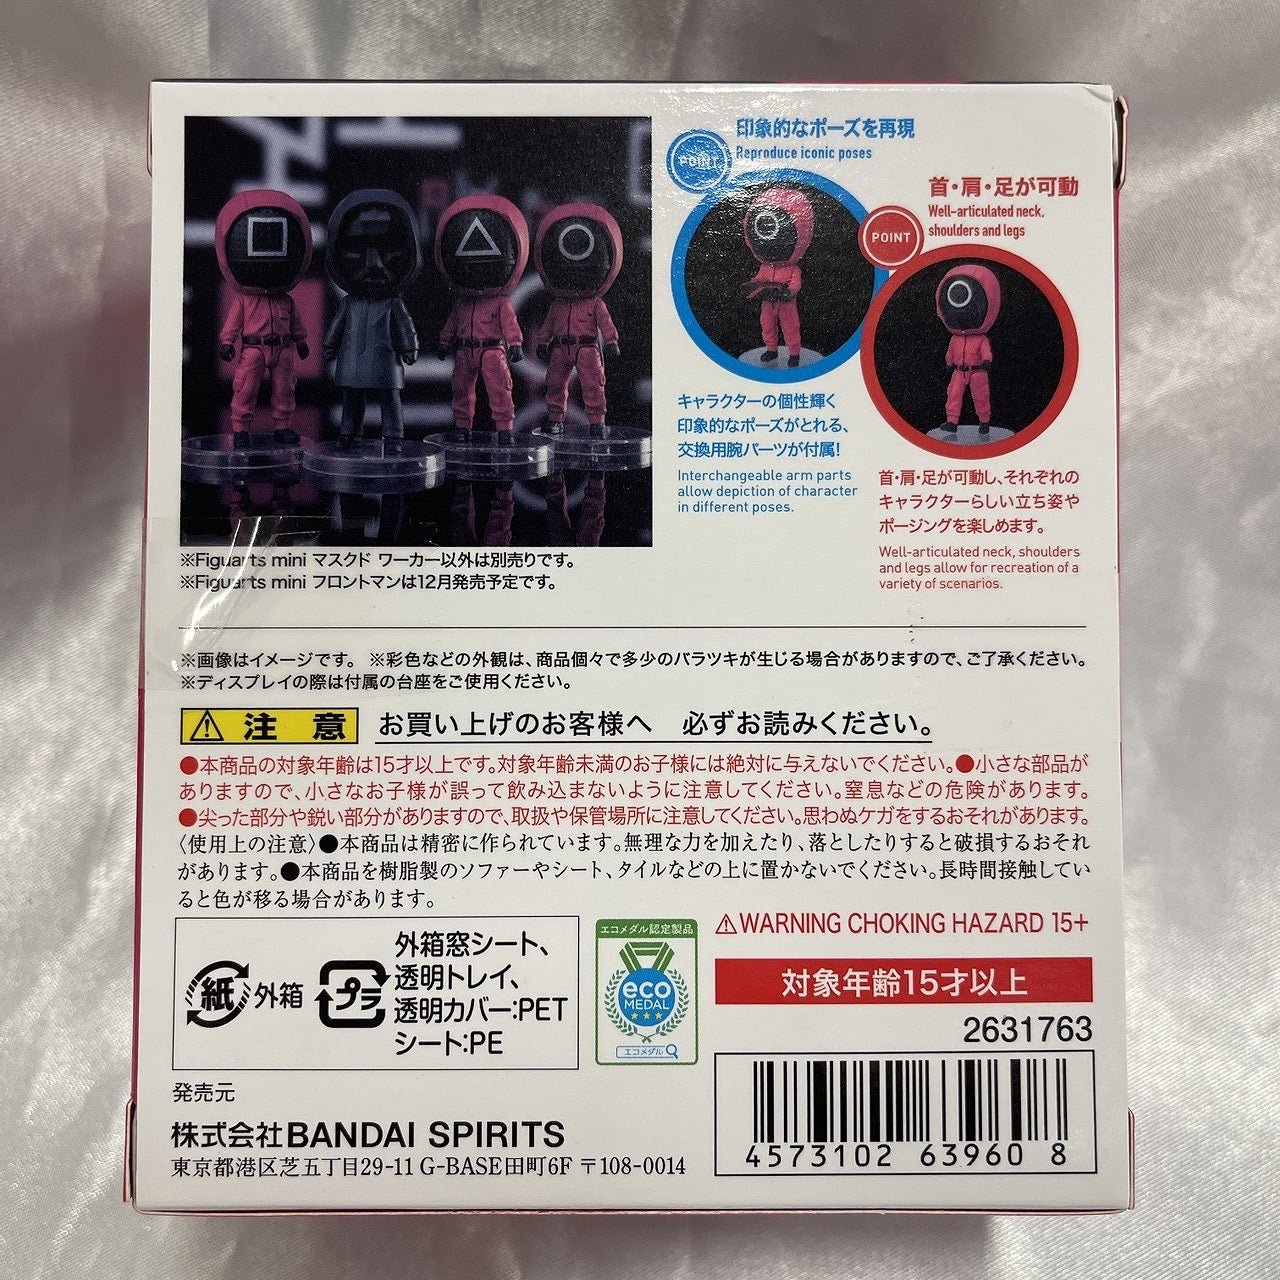 Figuarts mini Masked Worker "Squid Game"